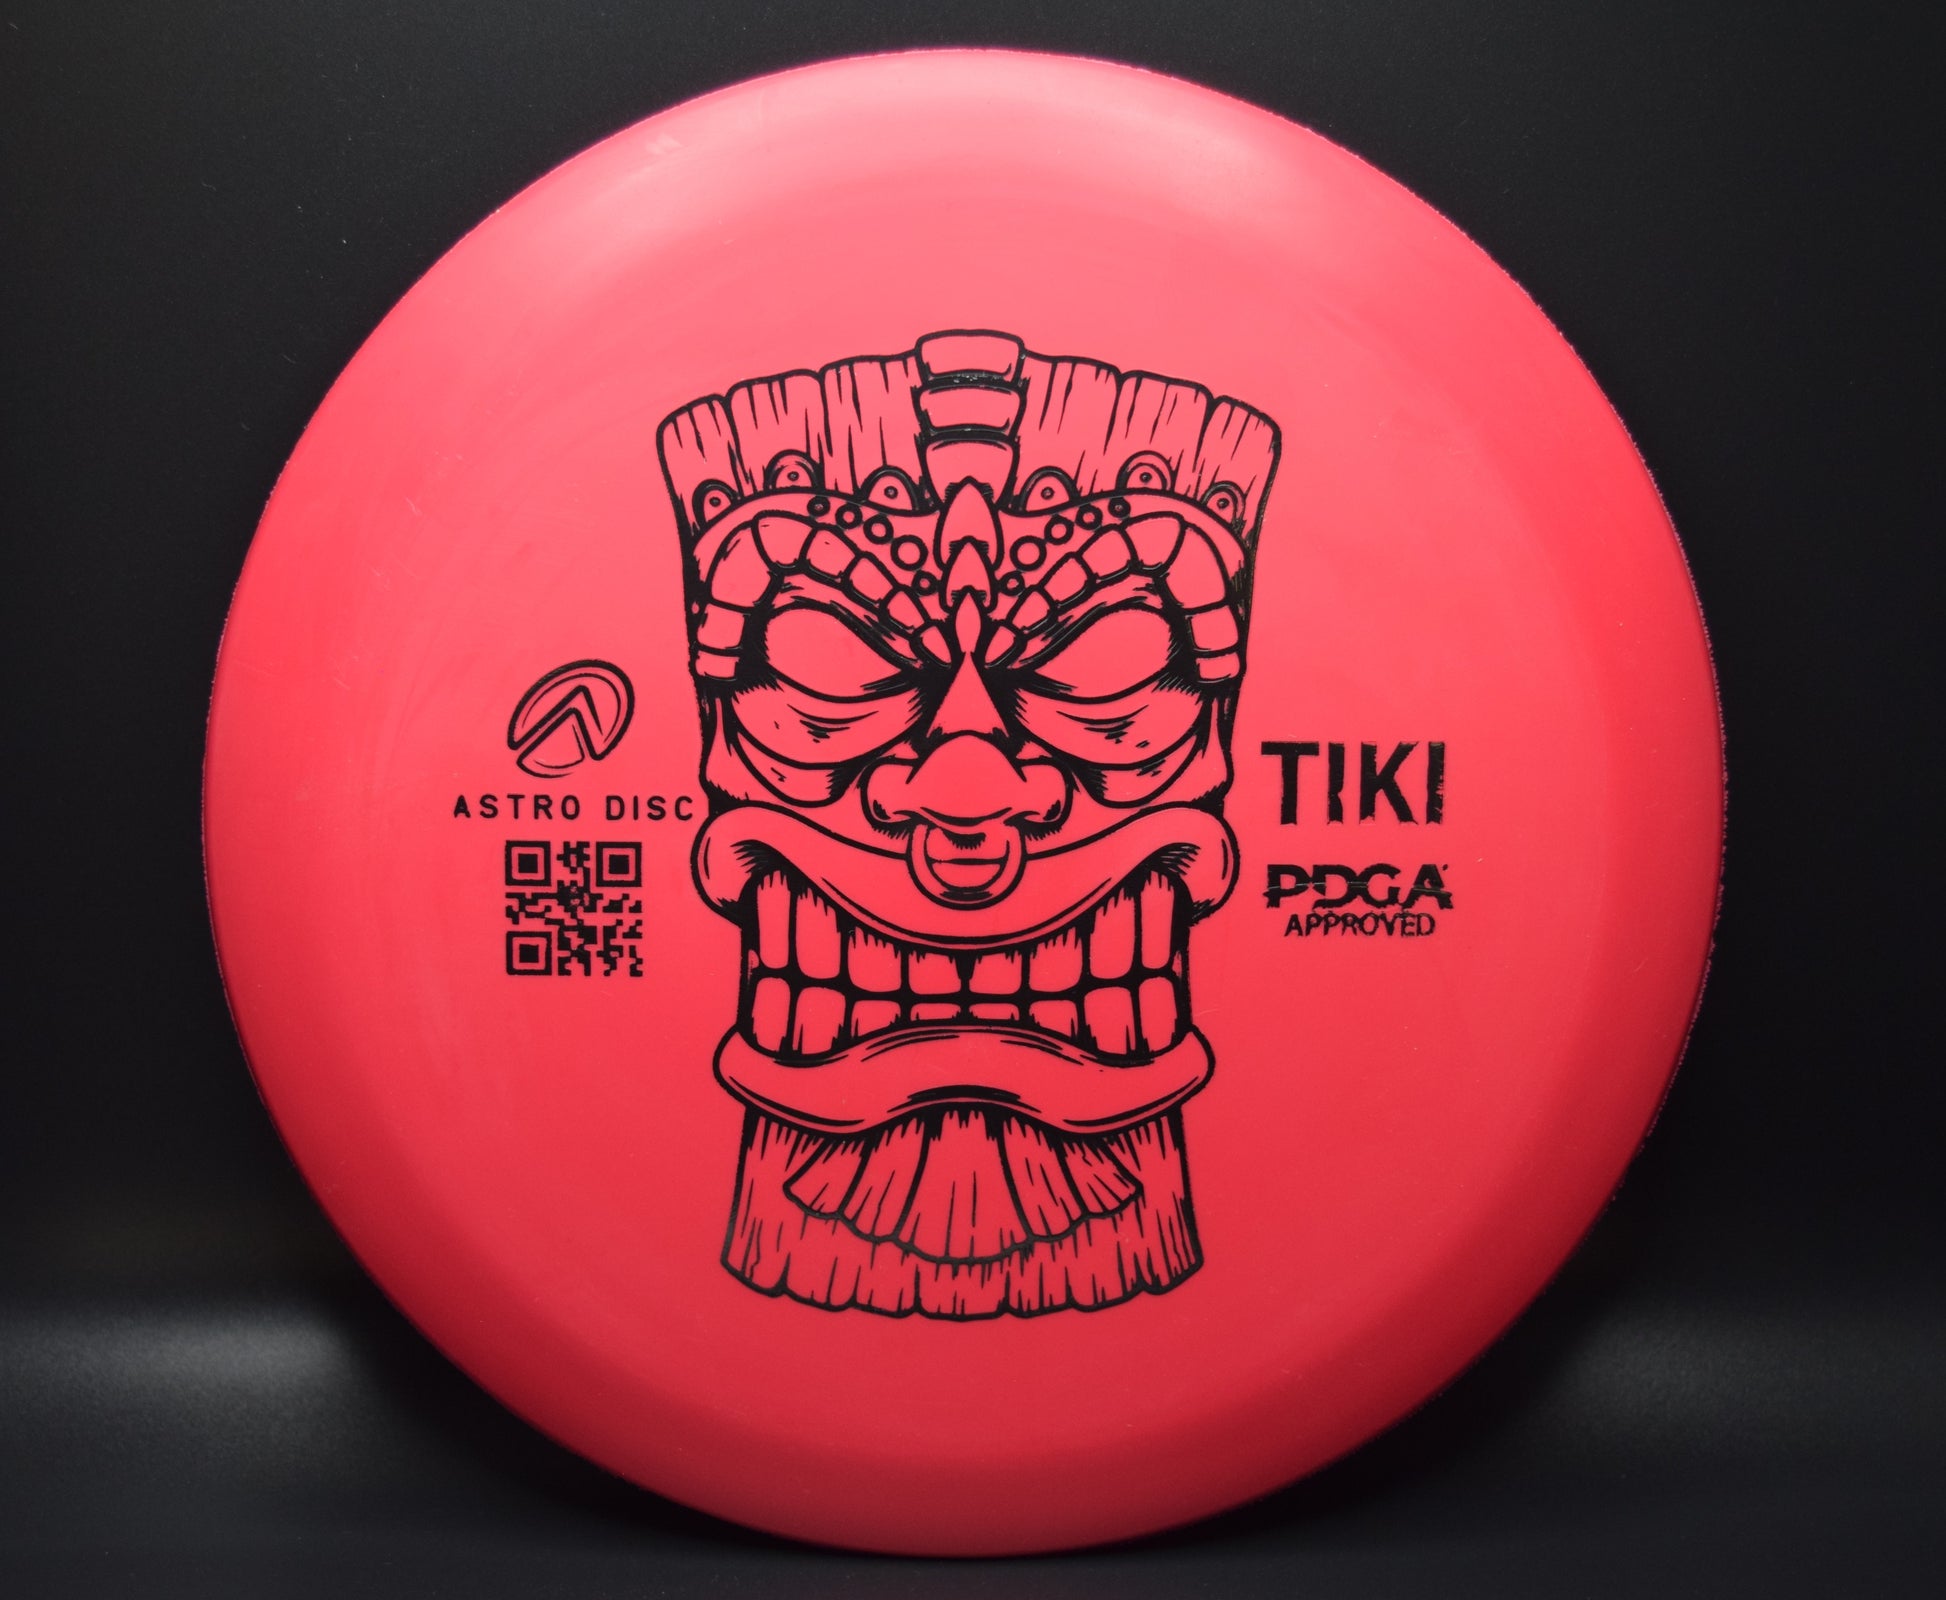 Tiki - red with a black stamp.